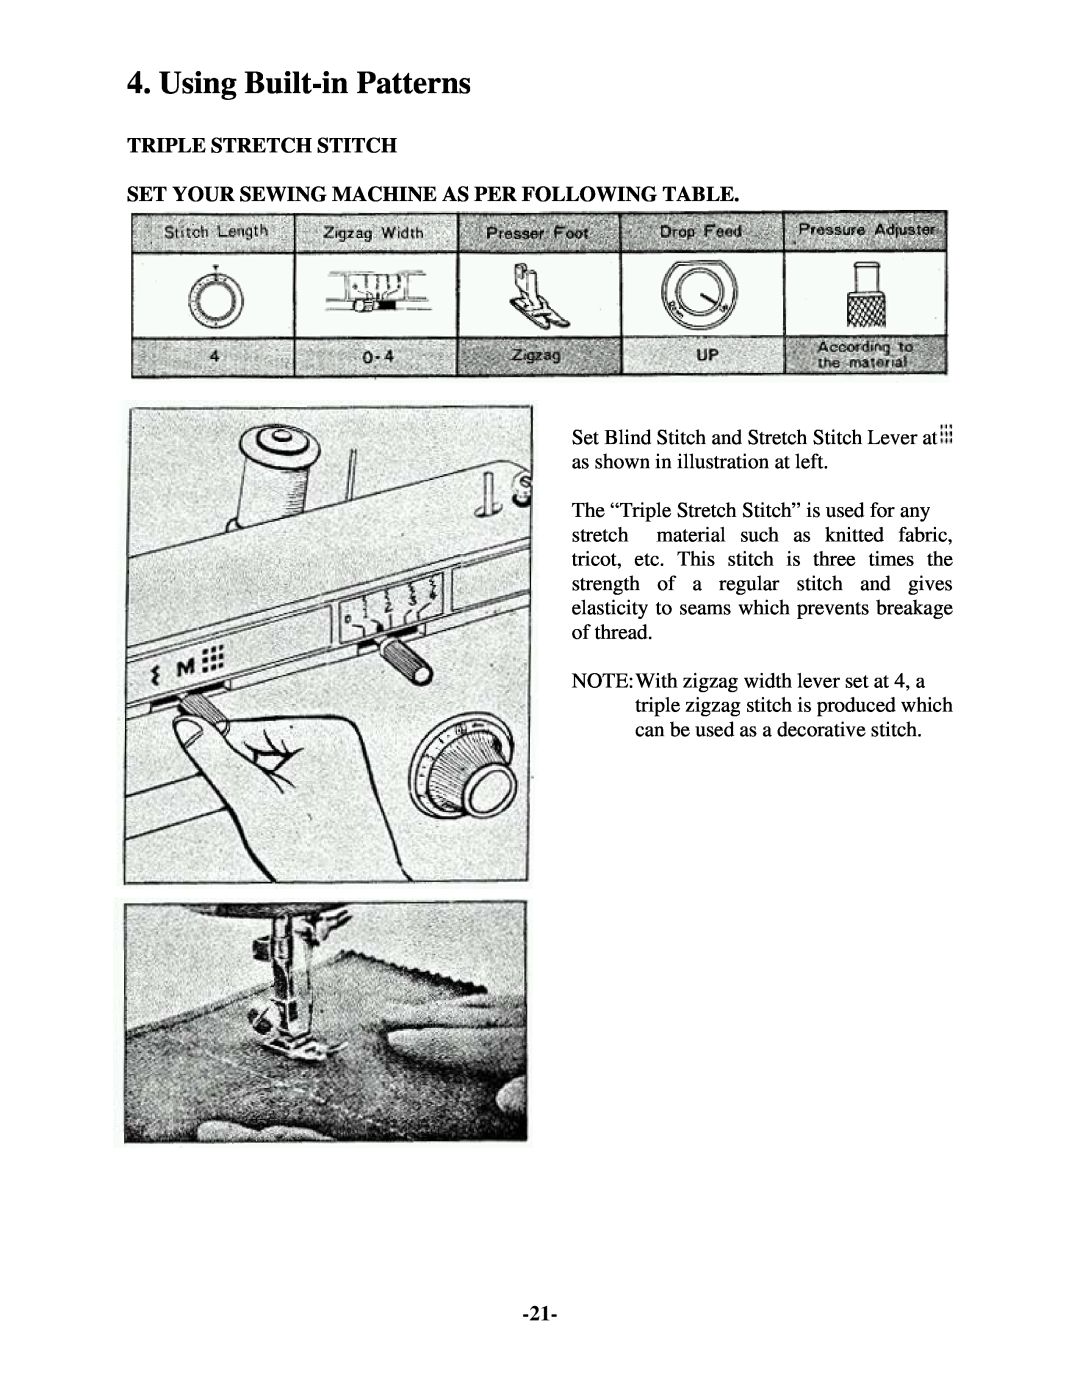 Brother 681B-UG manual Using Built-in Patterns, Triple Stretch Stitch Set Your Sewing Machine As Per Following Table 